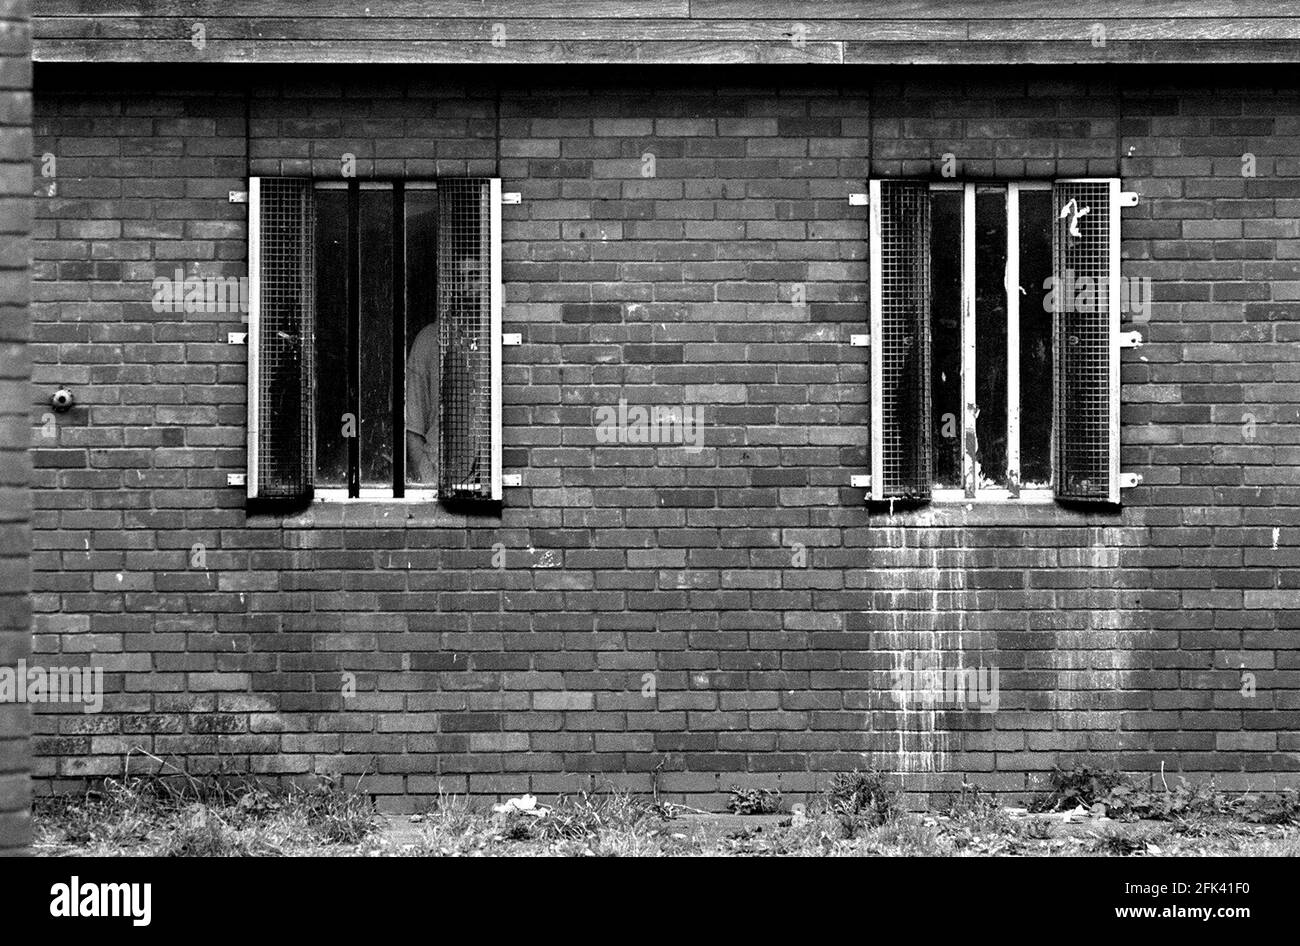 Prisoners at Remand Centre Feltham March 1999A prisoner looking out of a window of one of the house blocks at HM Young Offenders Institution and Remand Centre Feltham Richard Tilt the Director General of the Prison Service visitied the institution today the day before his retirement Stock Photo